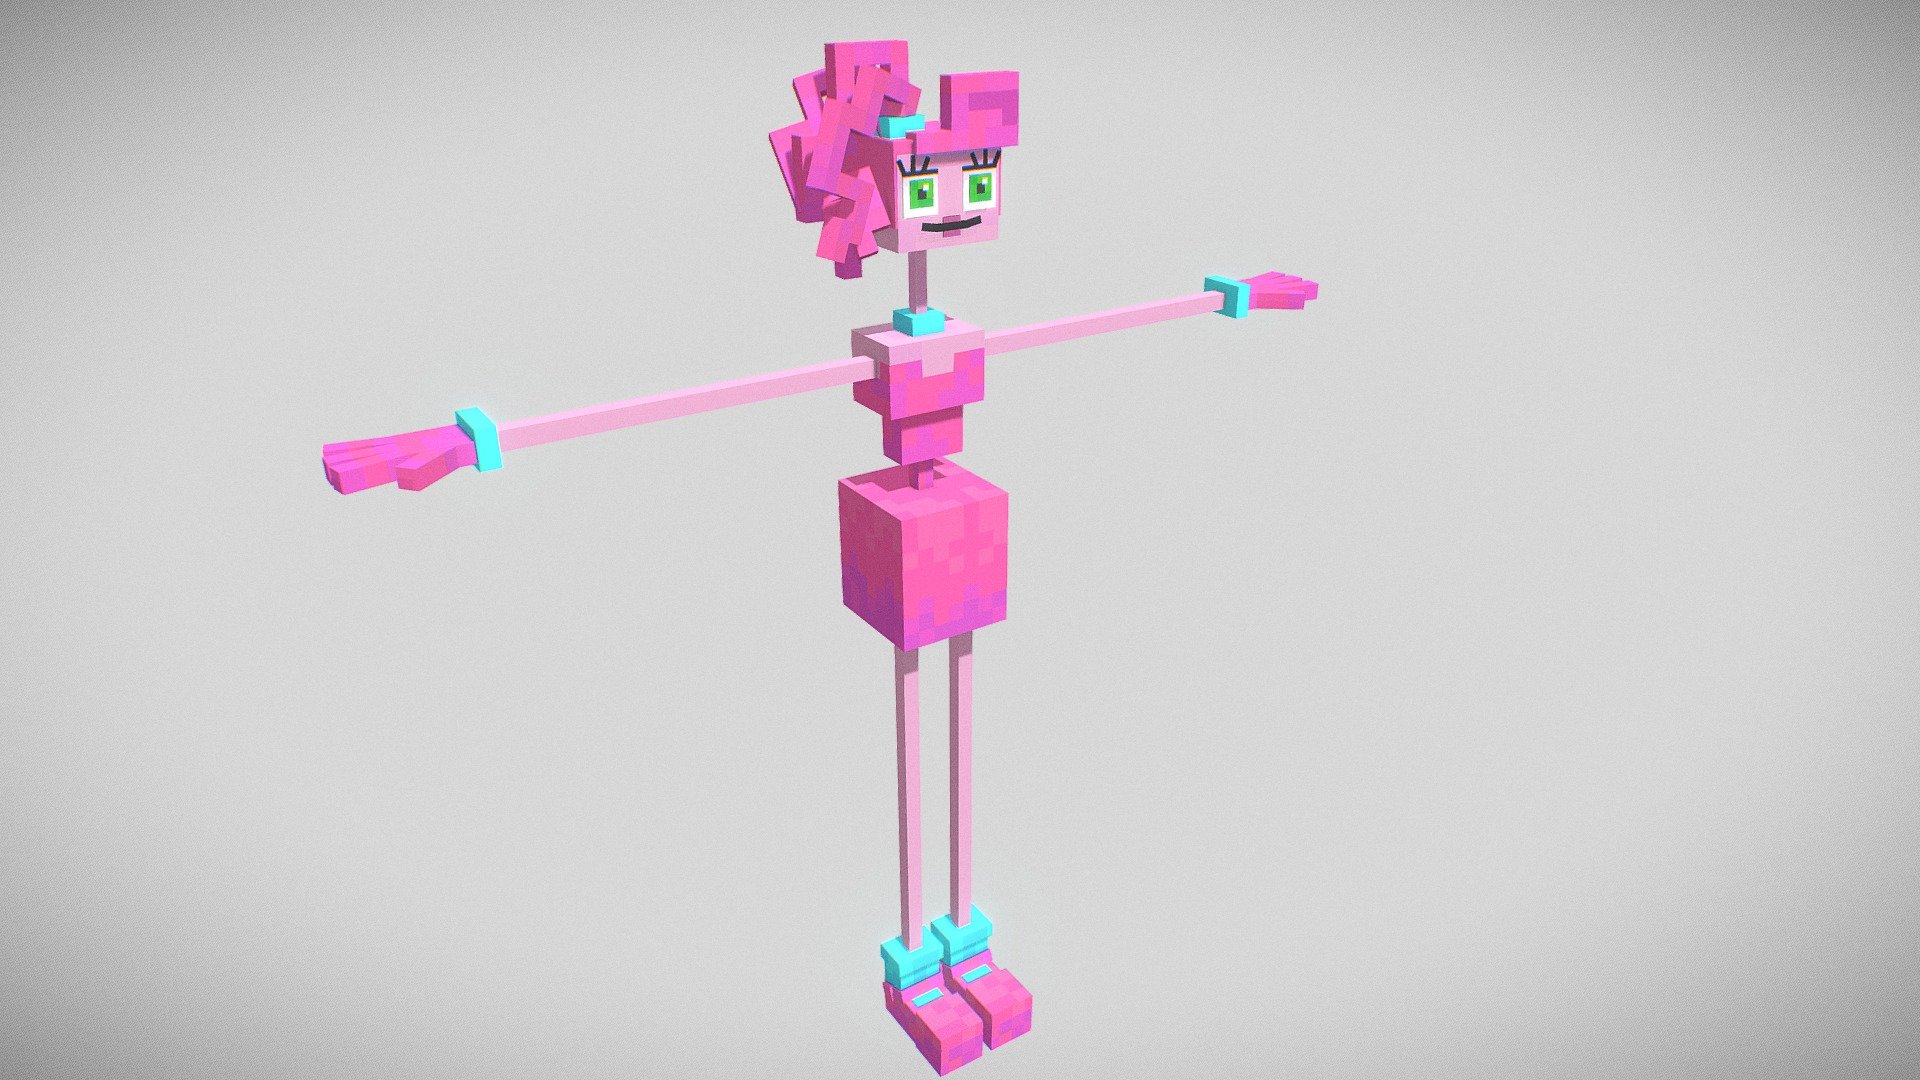 mommy long legs - Download Free 3D model by FranciscooFMP (@FranciscooFMP)  [4635305]